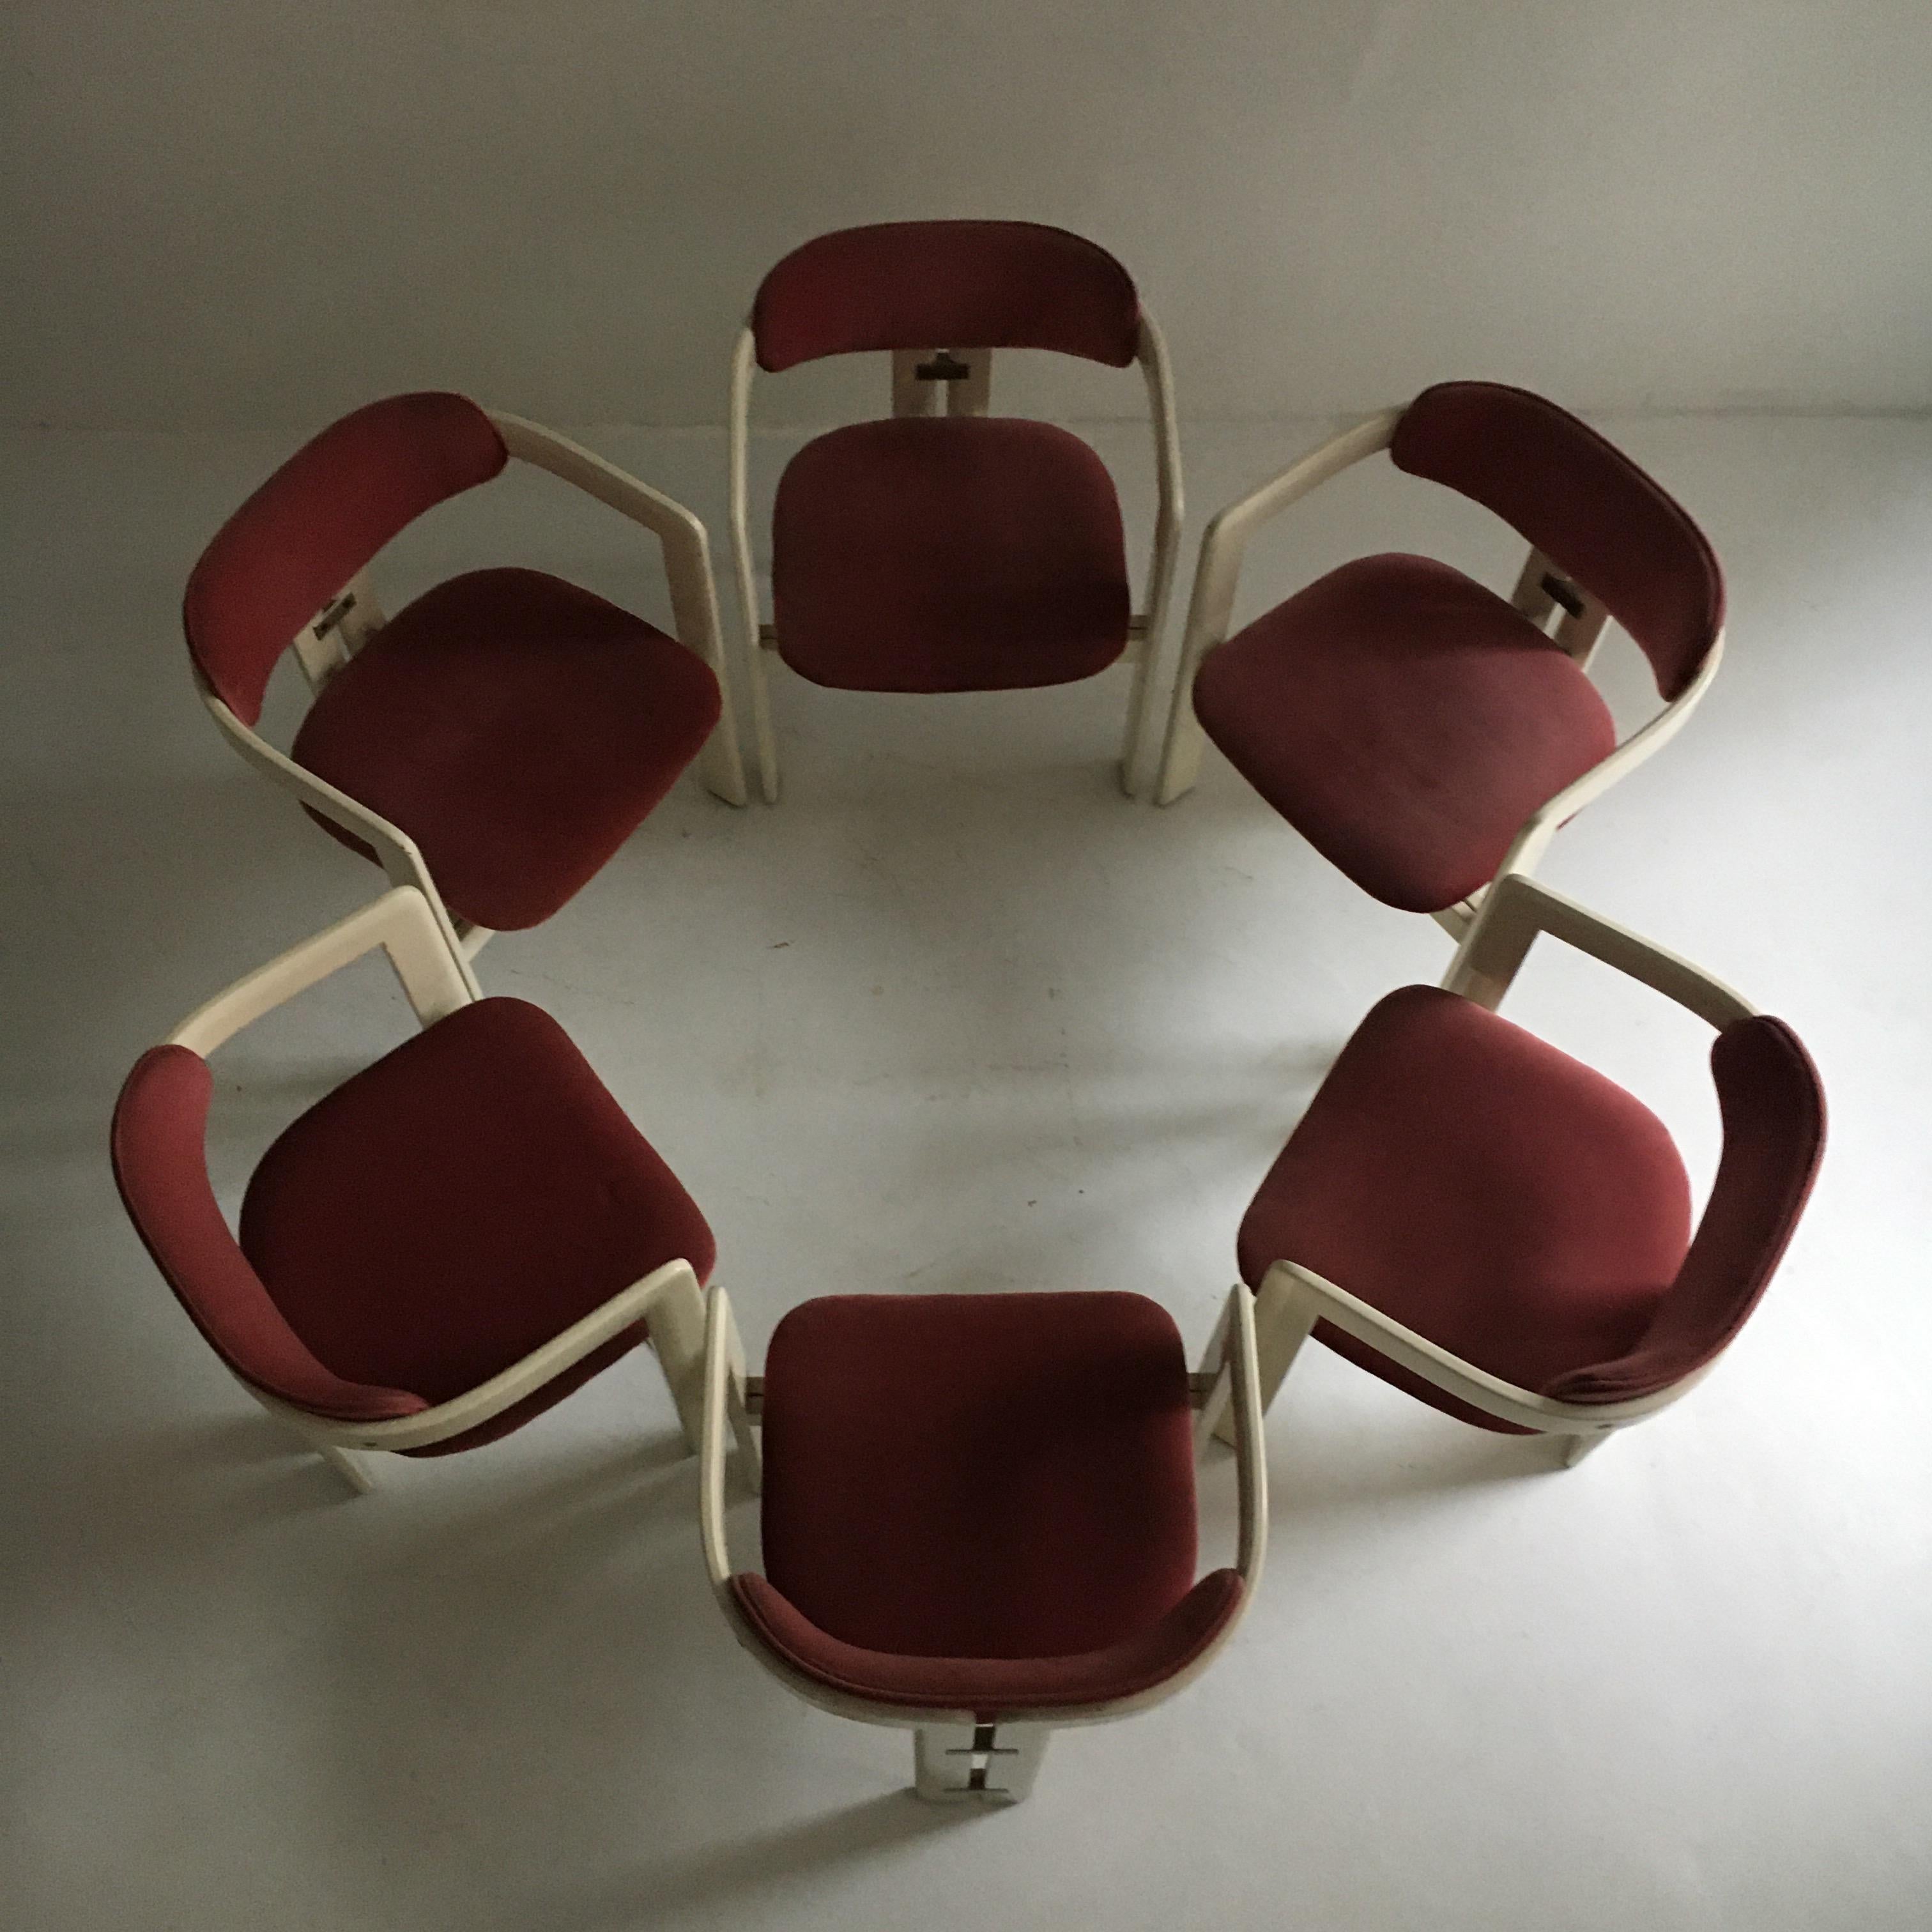 Augusto Savini 'Pamplona' set of six dining chairs in original fabric by Pozzi, Italy, 1965.